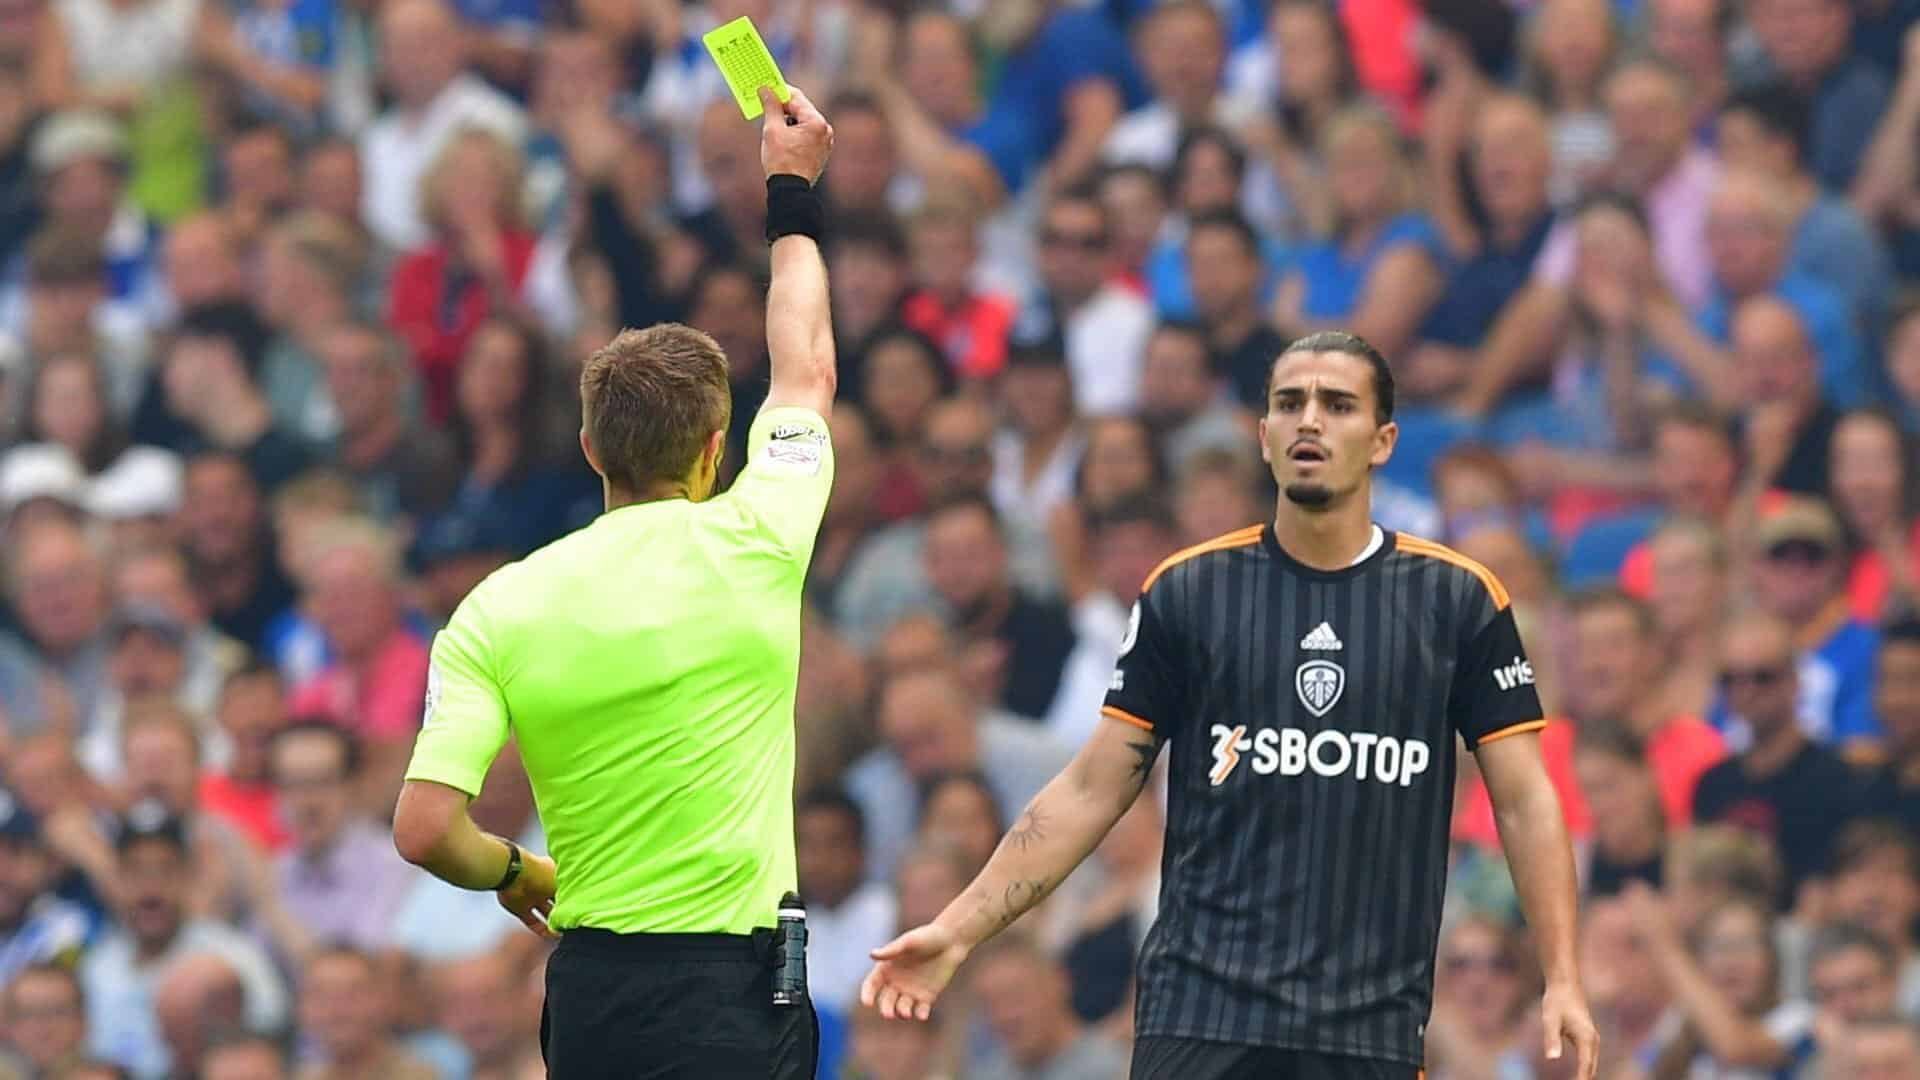 Pascal Struijk gets a yellow card at Brighton. We do not like this ref